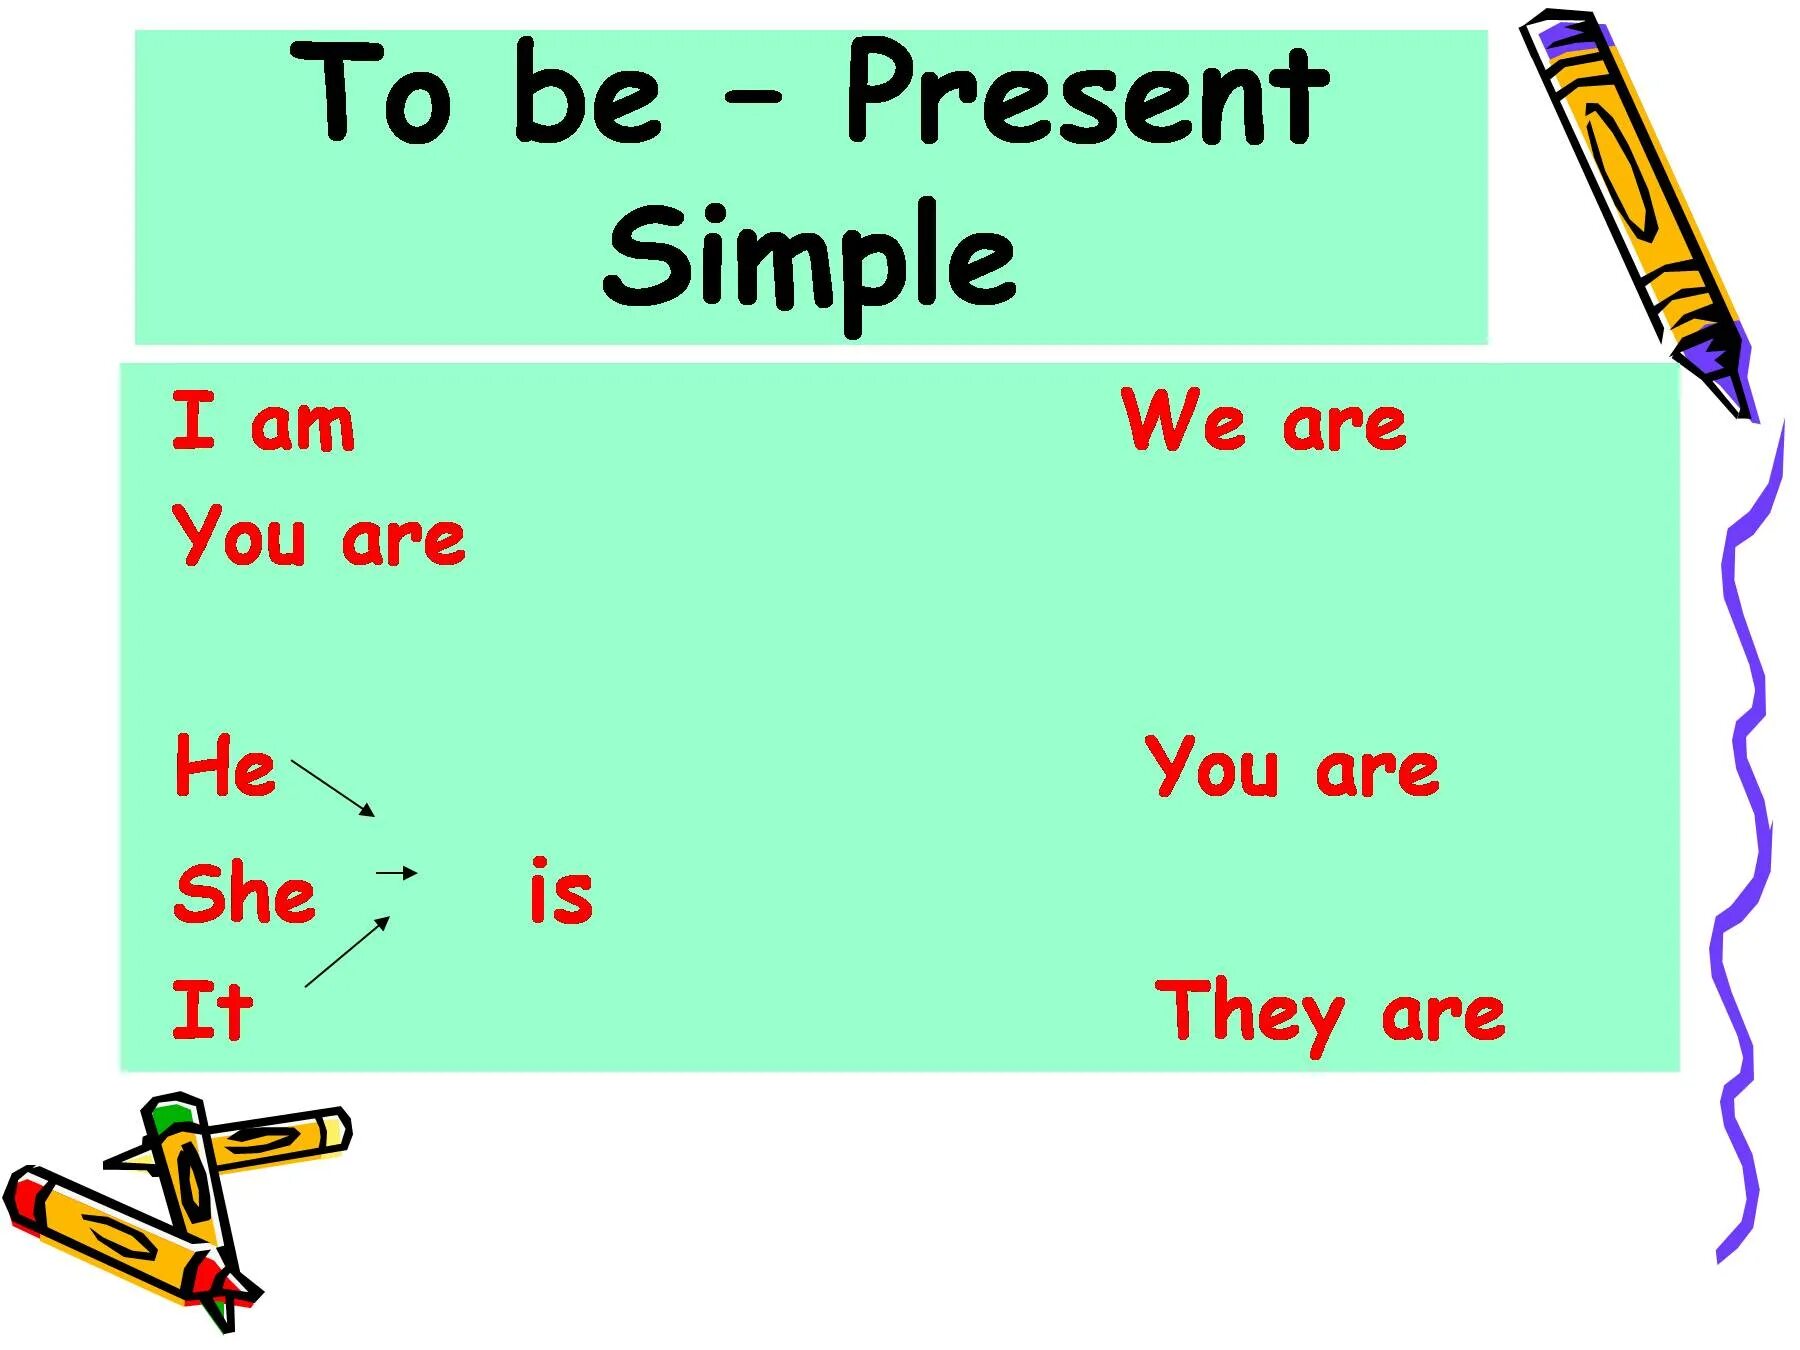 Present simple to be правила. To be present simple. Спряжение глагола to be в present simple. Be в презент Симпл. Глагол to be во временах simple